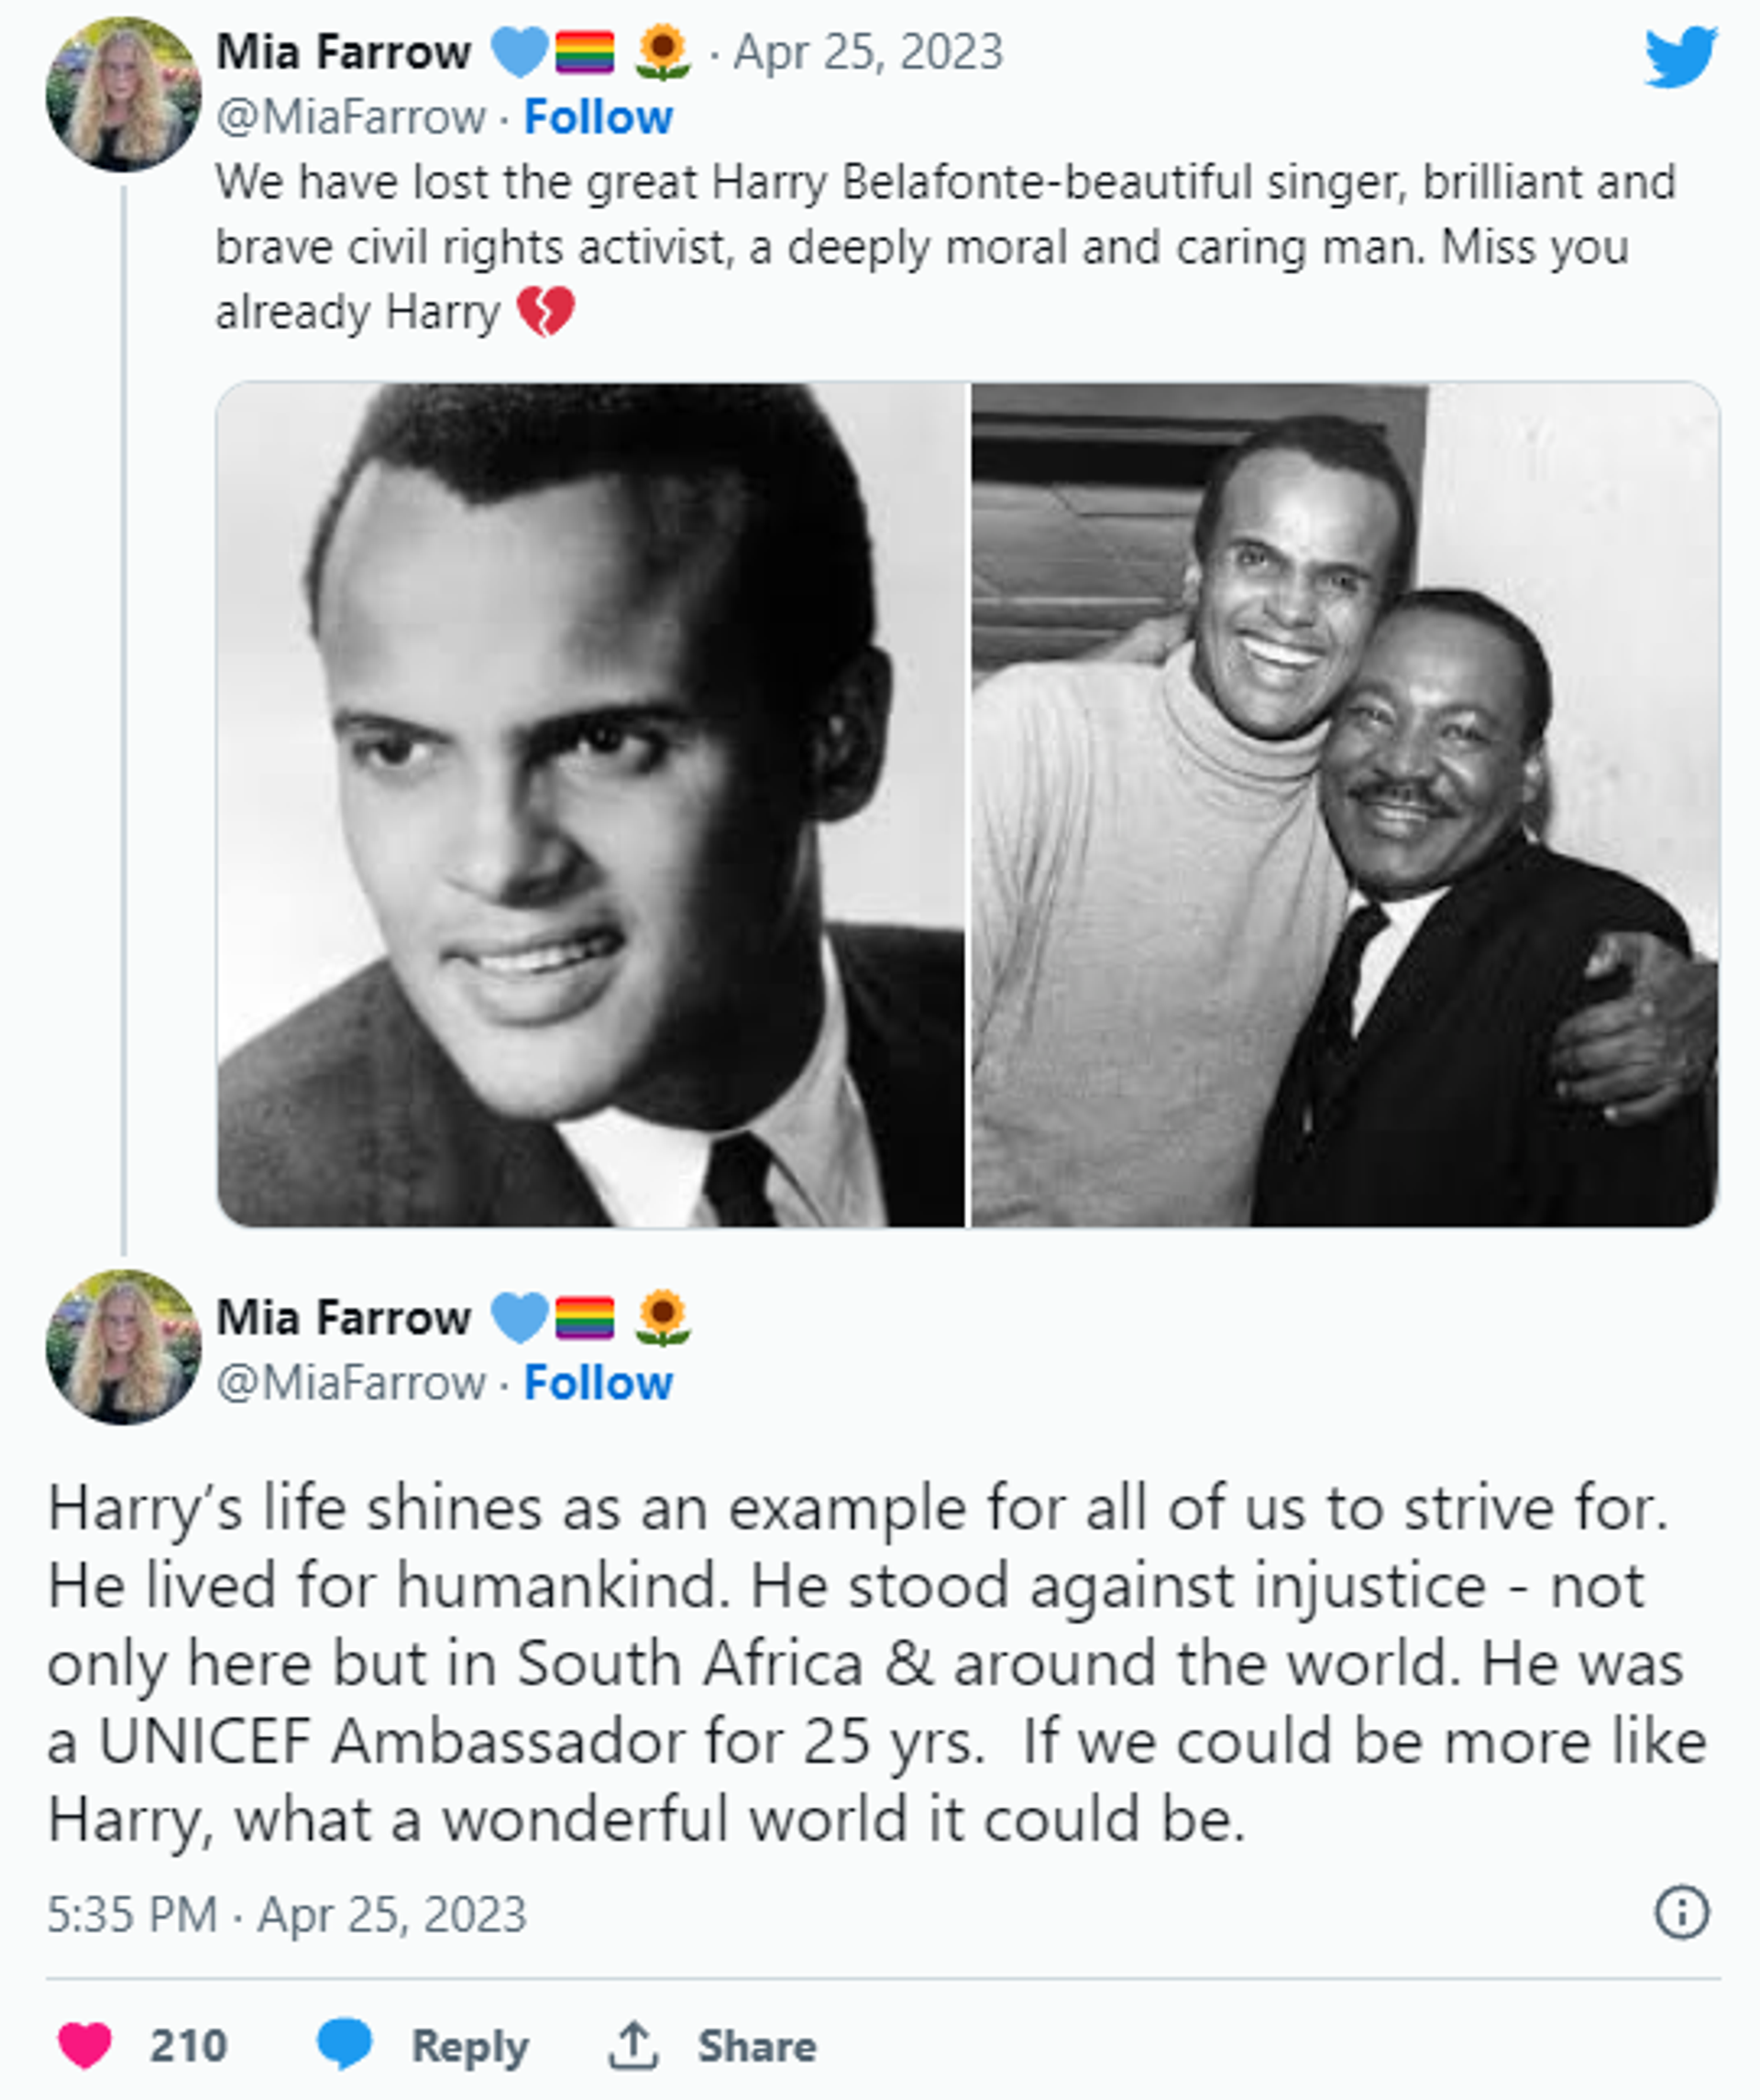 Mia Farrow expresses her admiration for Belafonte and notes that the world could learn a great deal from him. - Sputnik International, 1920, 25.04.2023